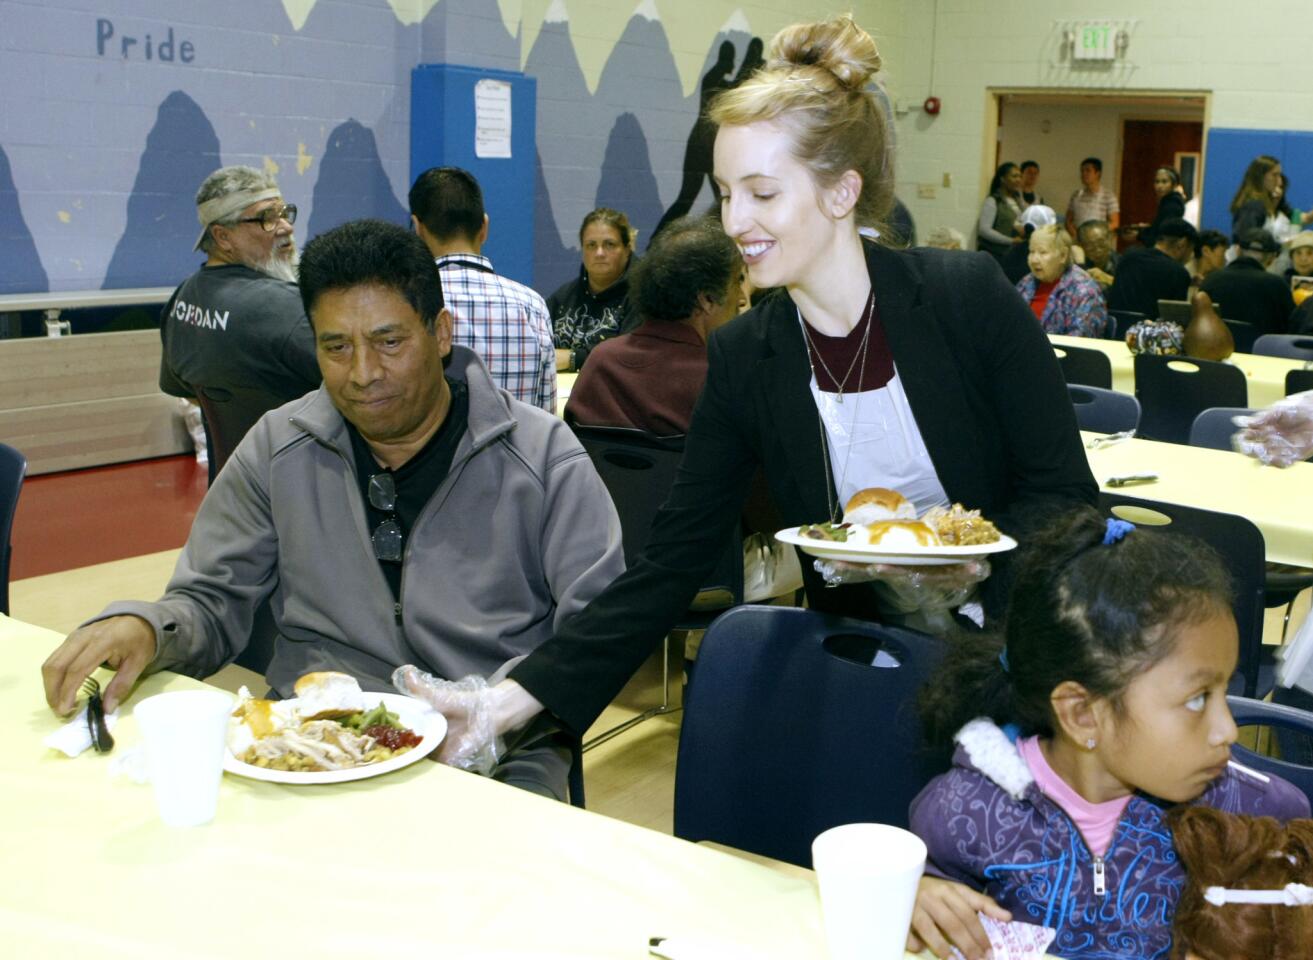 Volunteer Chelsea Giegerich serves a Thanksgiving dinner to Eduardo Contreras of Glendale at the Glendale Salvation Army's annual Thanksgiving Day dinner, at the Windsor Road location, in Glendale on Thursday, Nov. 24, 2016. More than 150 people were served turkey, mashed potatoes and gravy, vegetables, pie and drinks in the first hour. The location was expecting about 350 people to come for dinner.